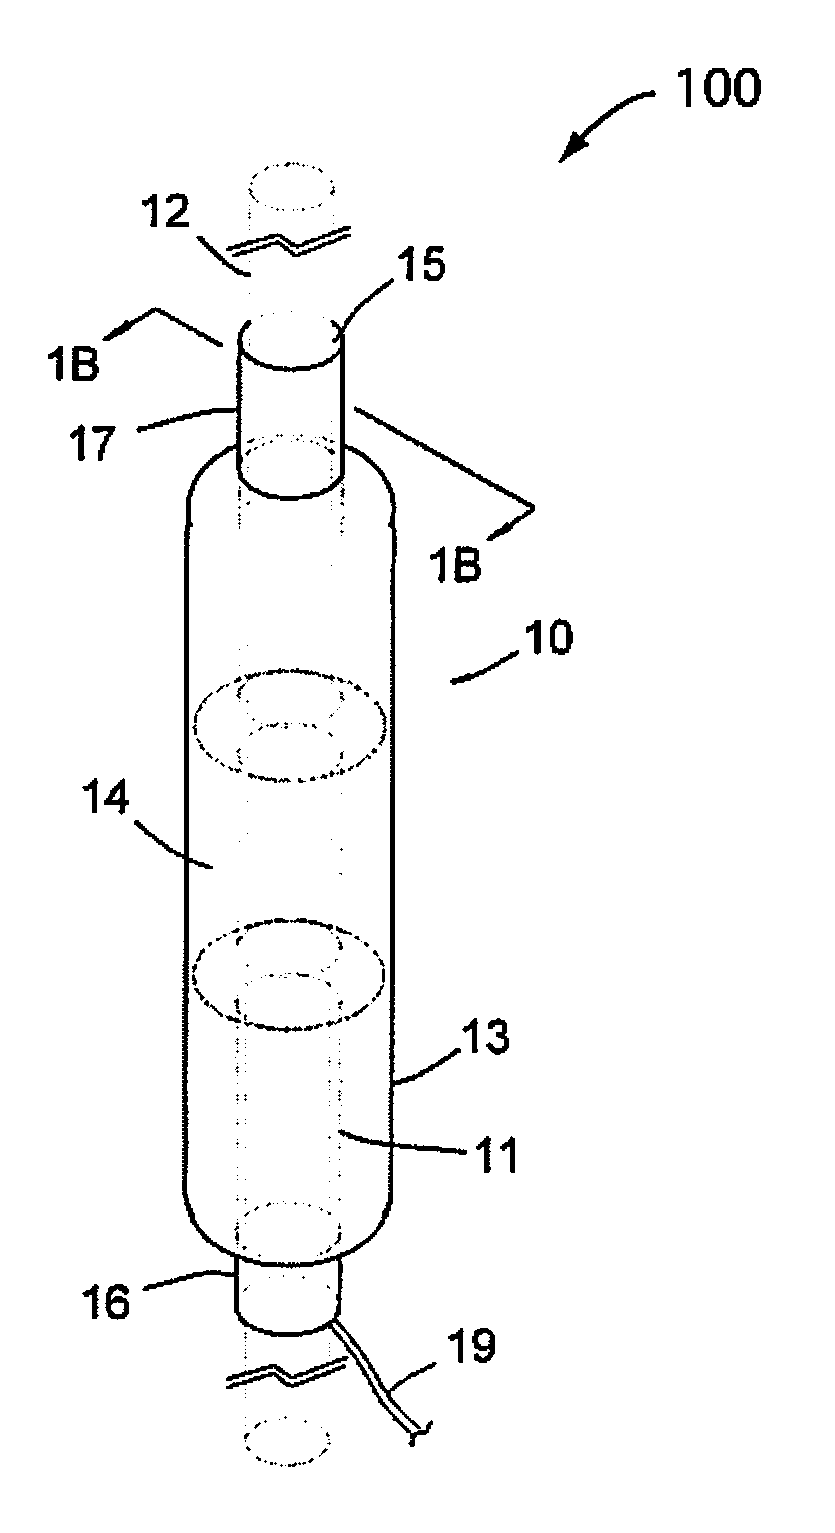 Inflatable artificial muscle for elongated instrument